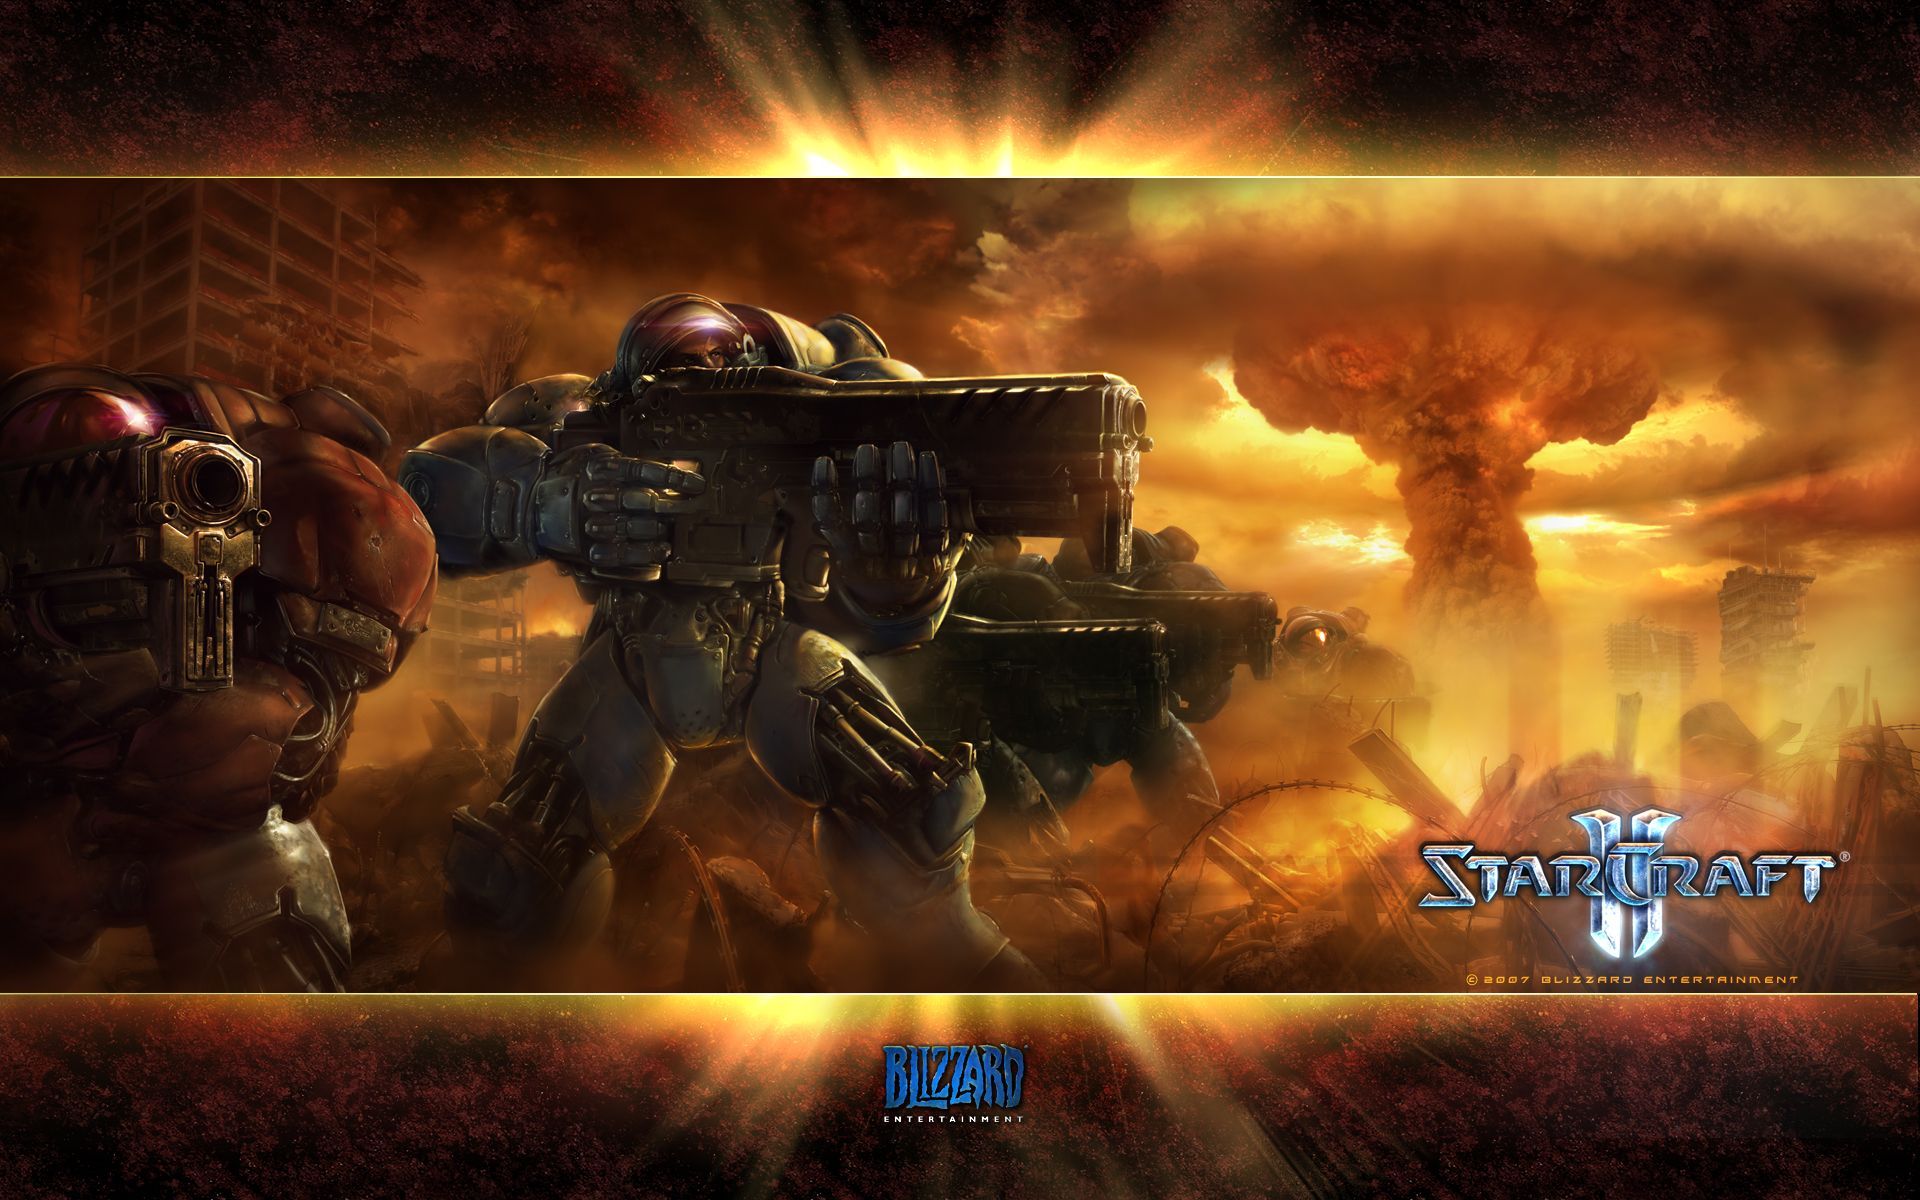 Starcraft 2 Free Desktop Wallpapers for HD, Widescreen and Mobile